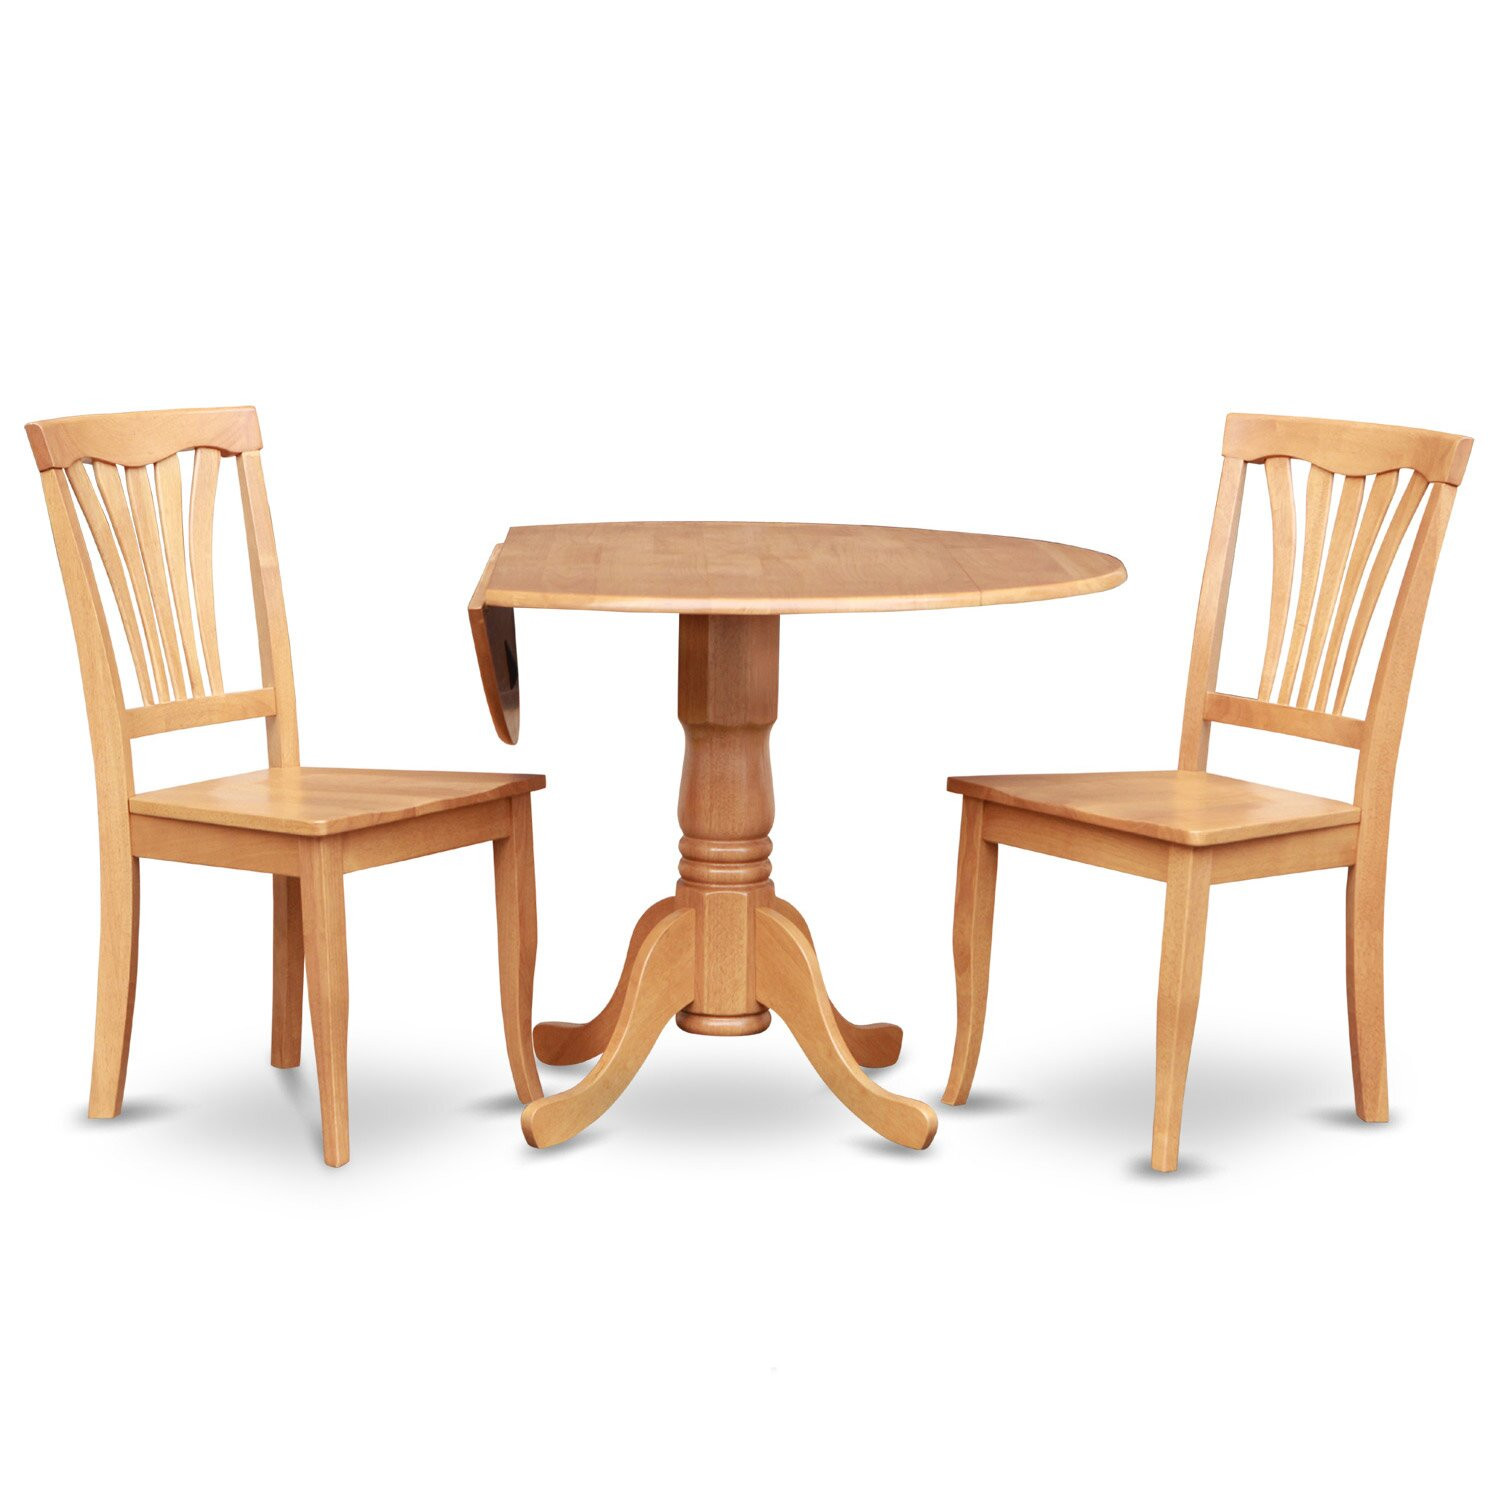 Wayfair Small Kitchen Tables
 Wooden Importers Dublin 3 Piece Dining Set & Reviews